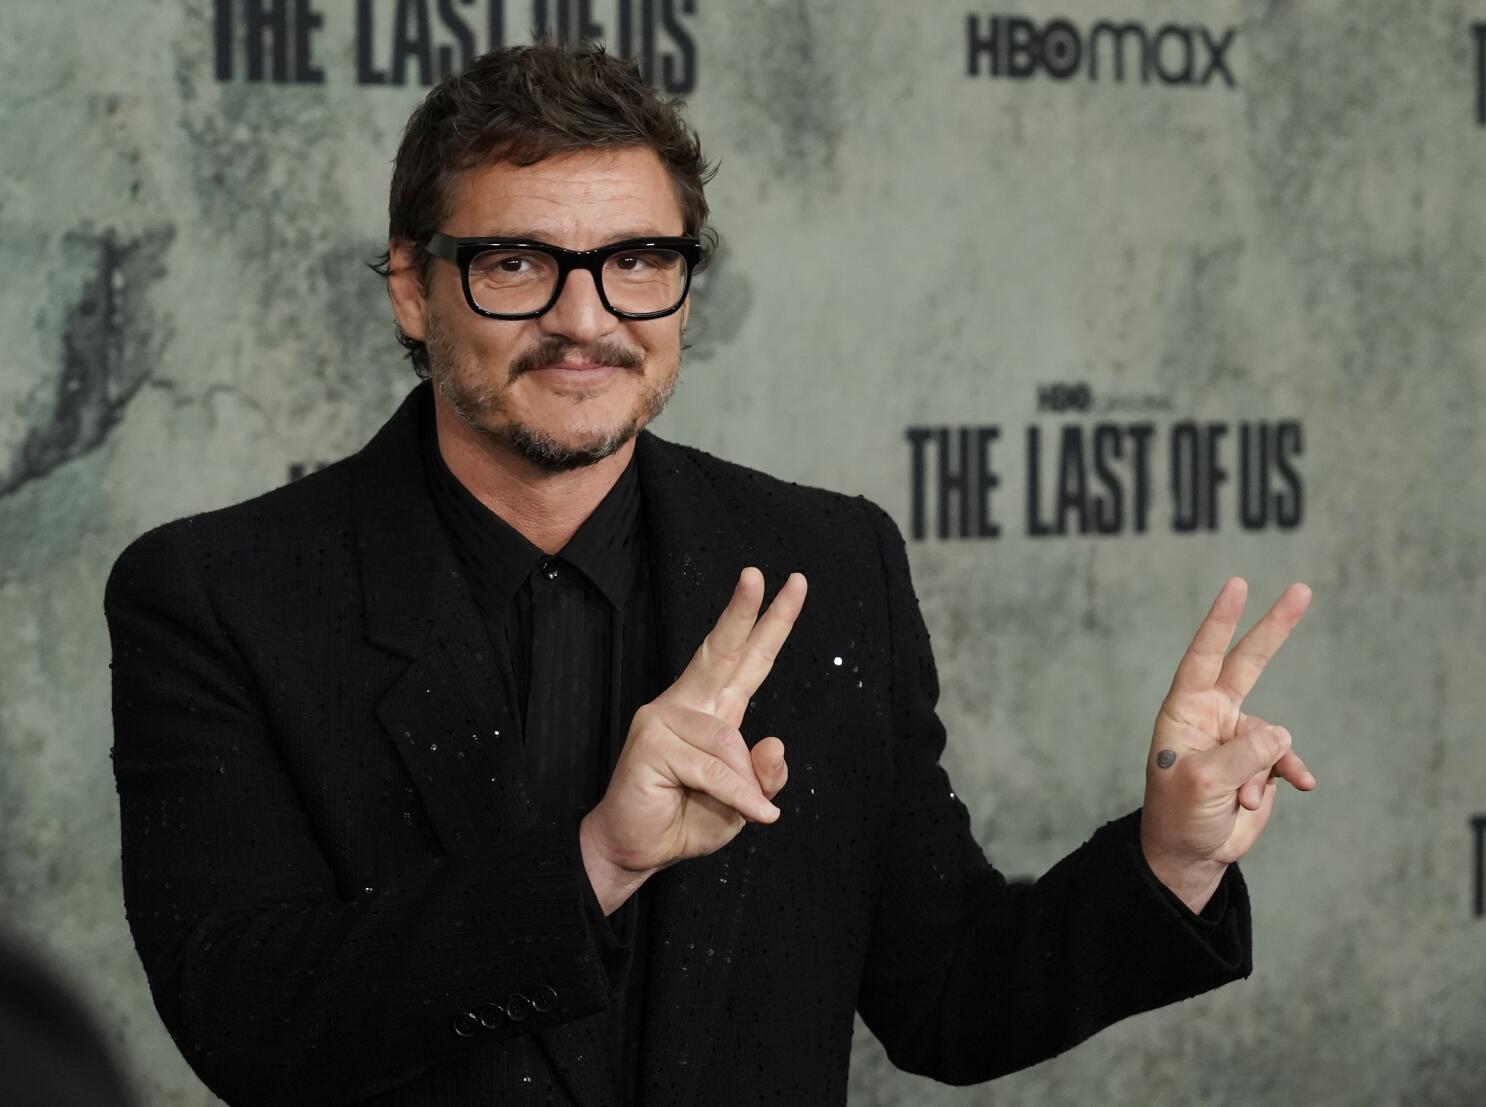 You can now play The Last of Us using the face of Pedro Pascal